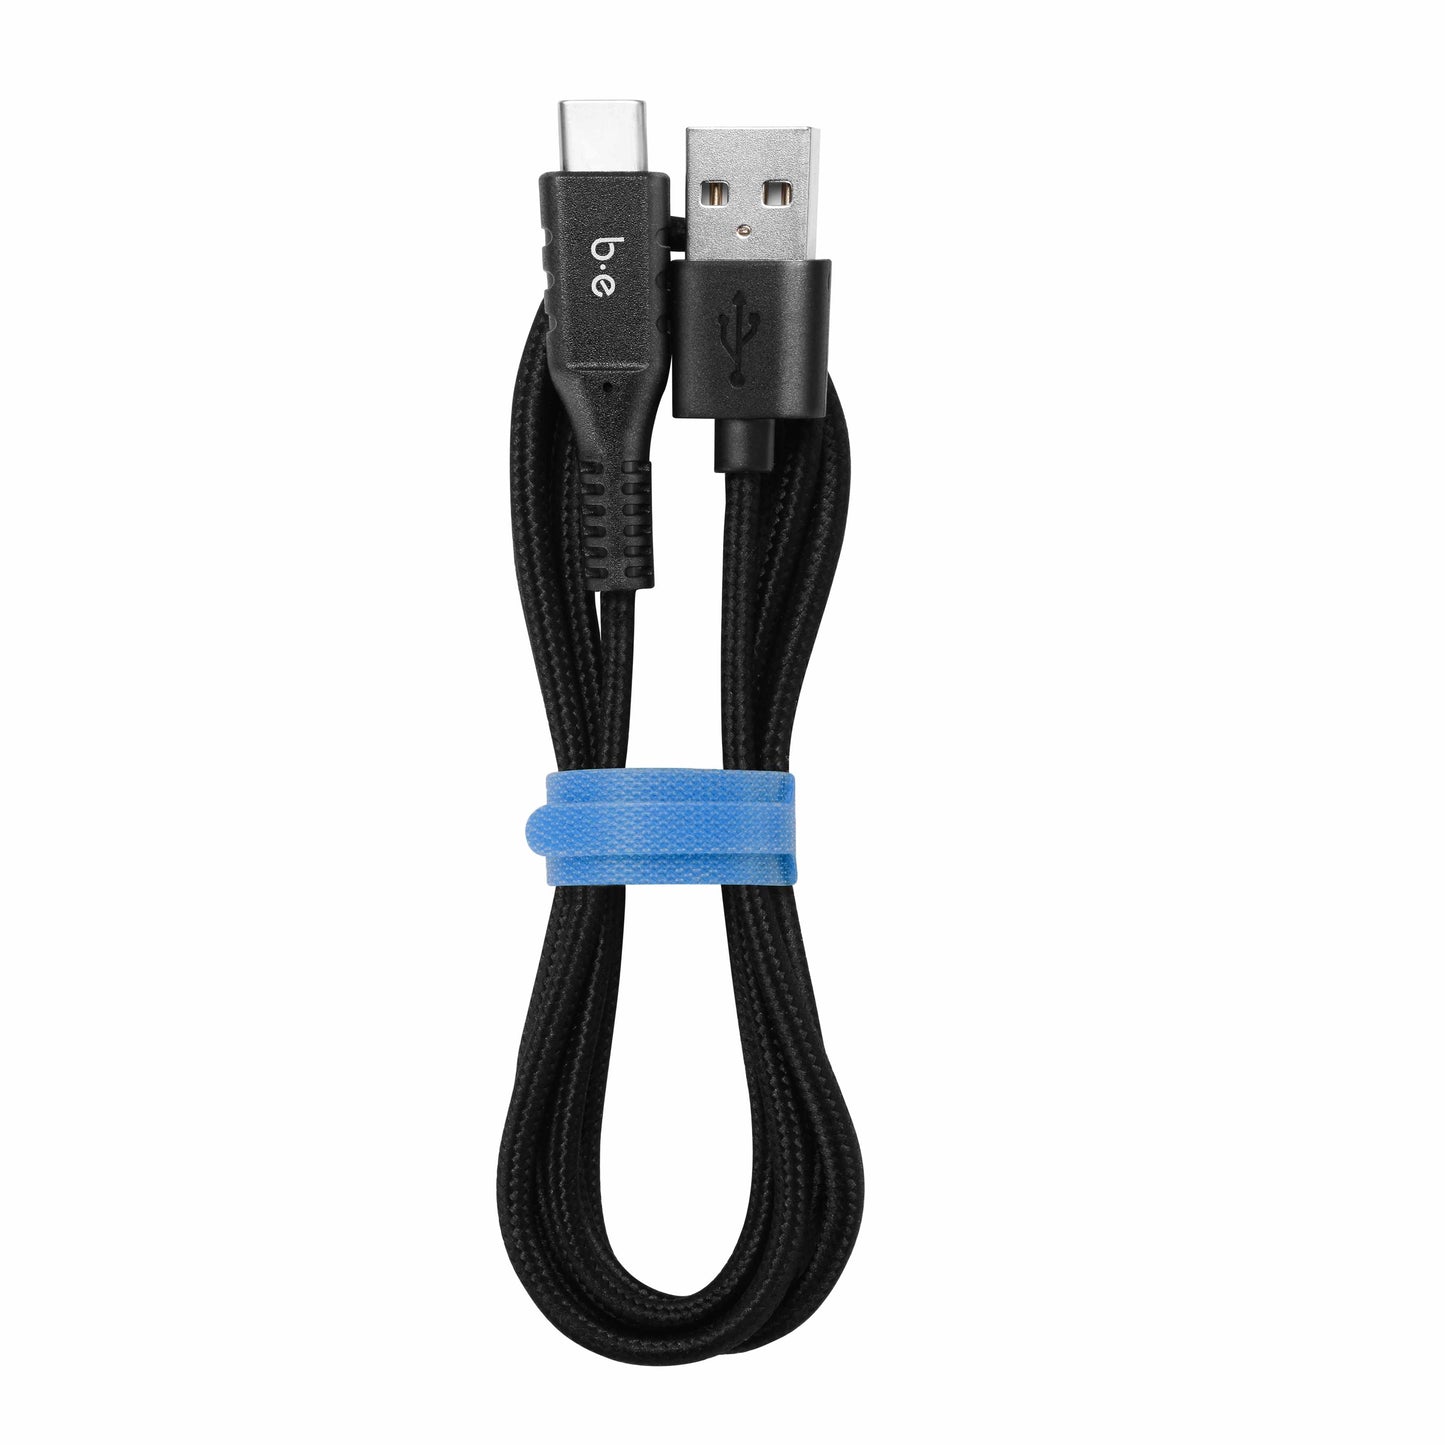 Braided Charge/Sync USB-C to USB-A Cable 6ft Black